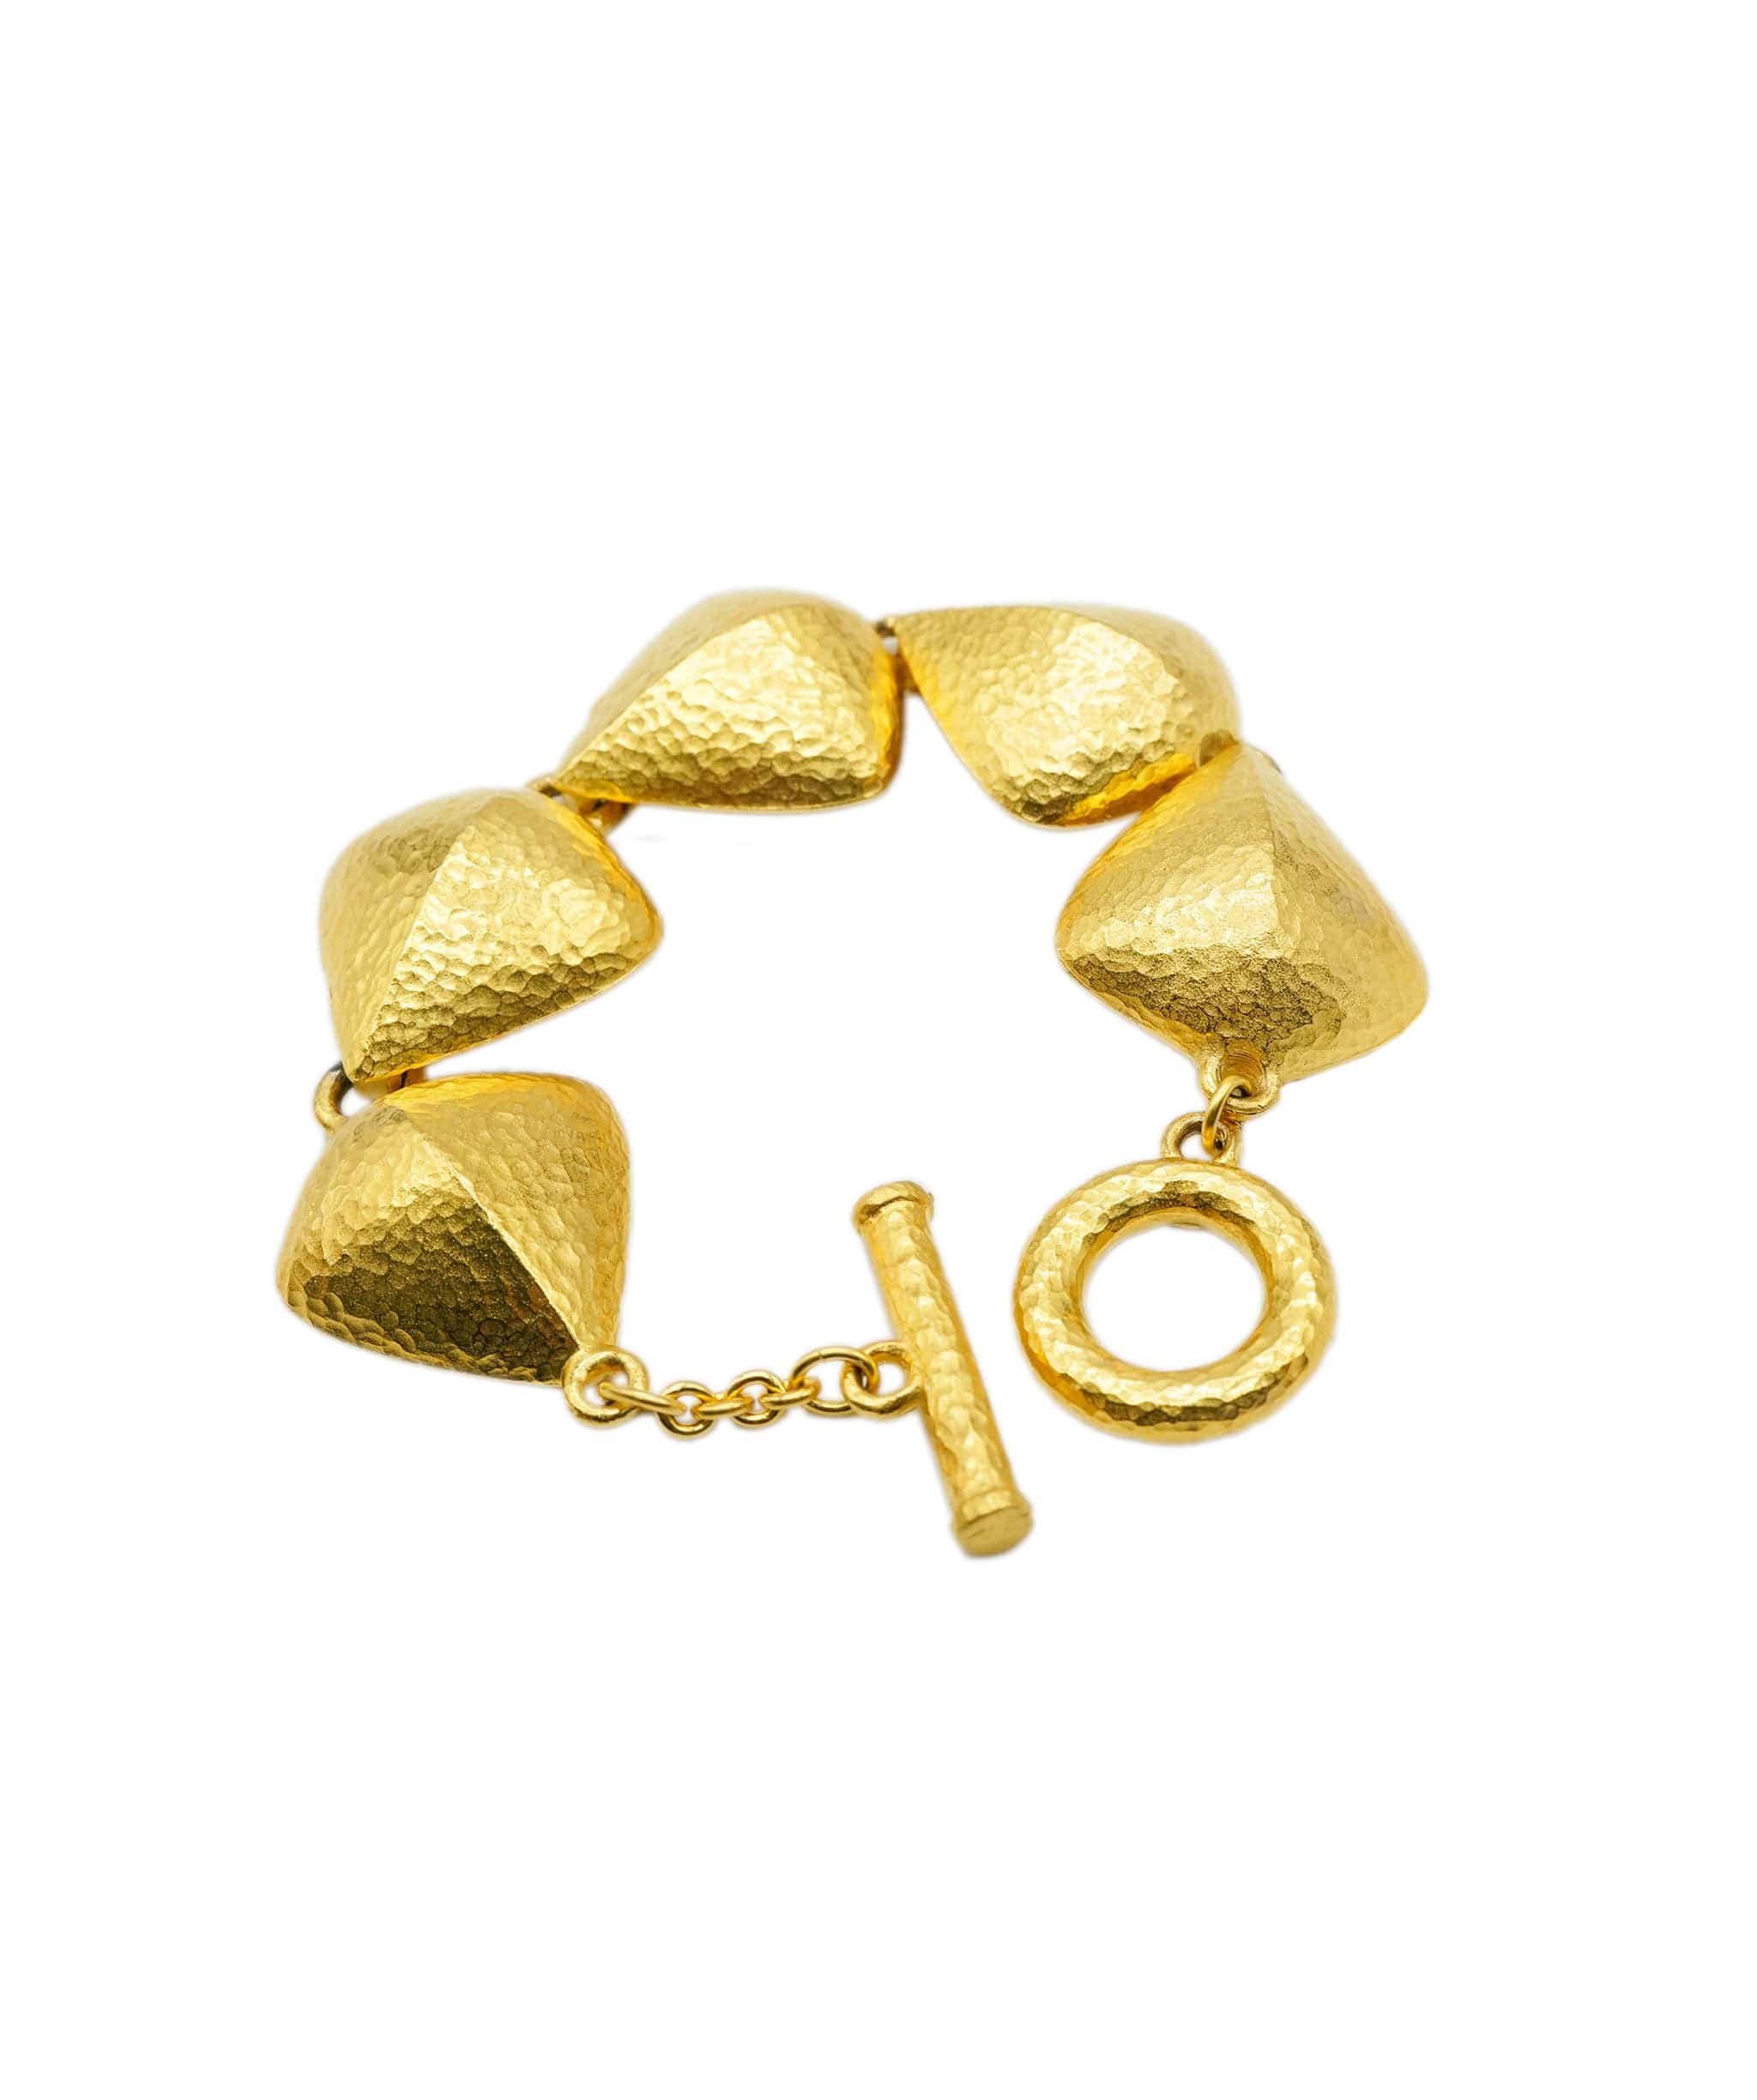 Givenchy Givenchy gold dome bracelet AEL1140